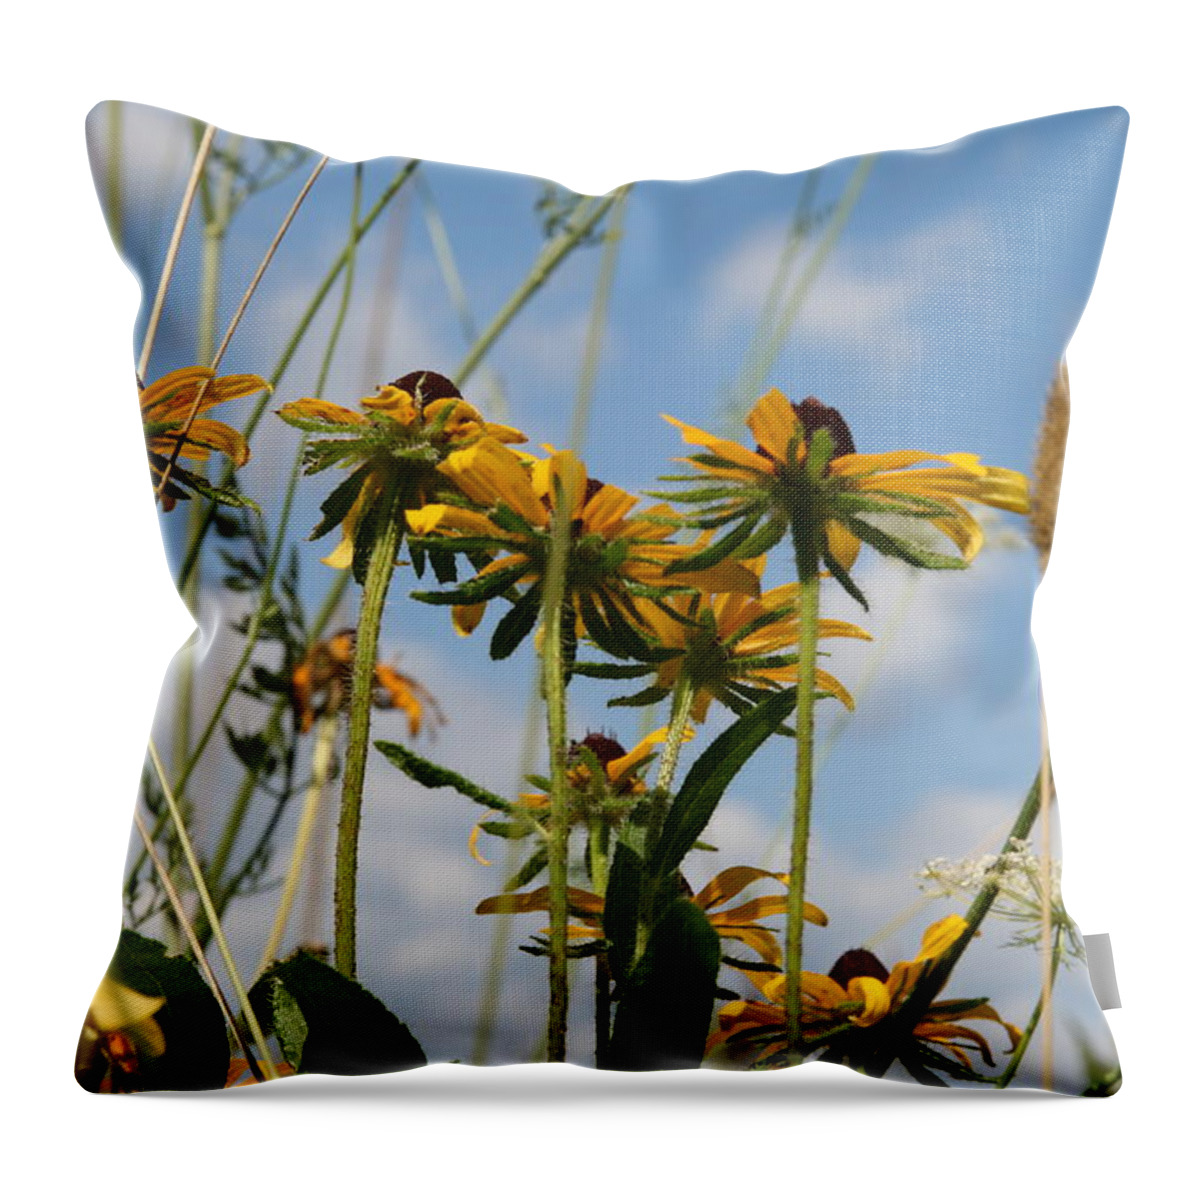 Yellow Flowers Throw Pillow featuring the photograph Black Eyed Susan Cluster by Neal Eslinger